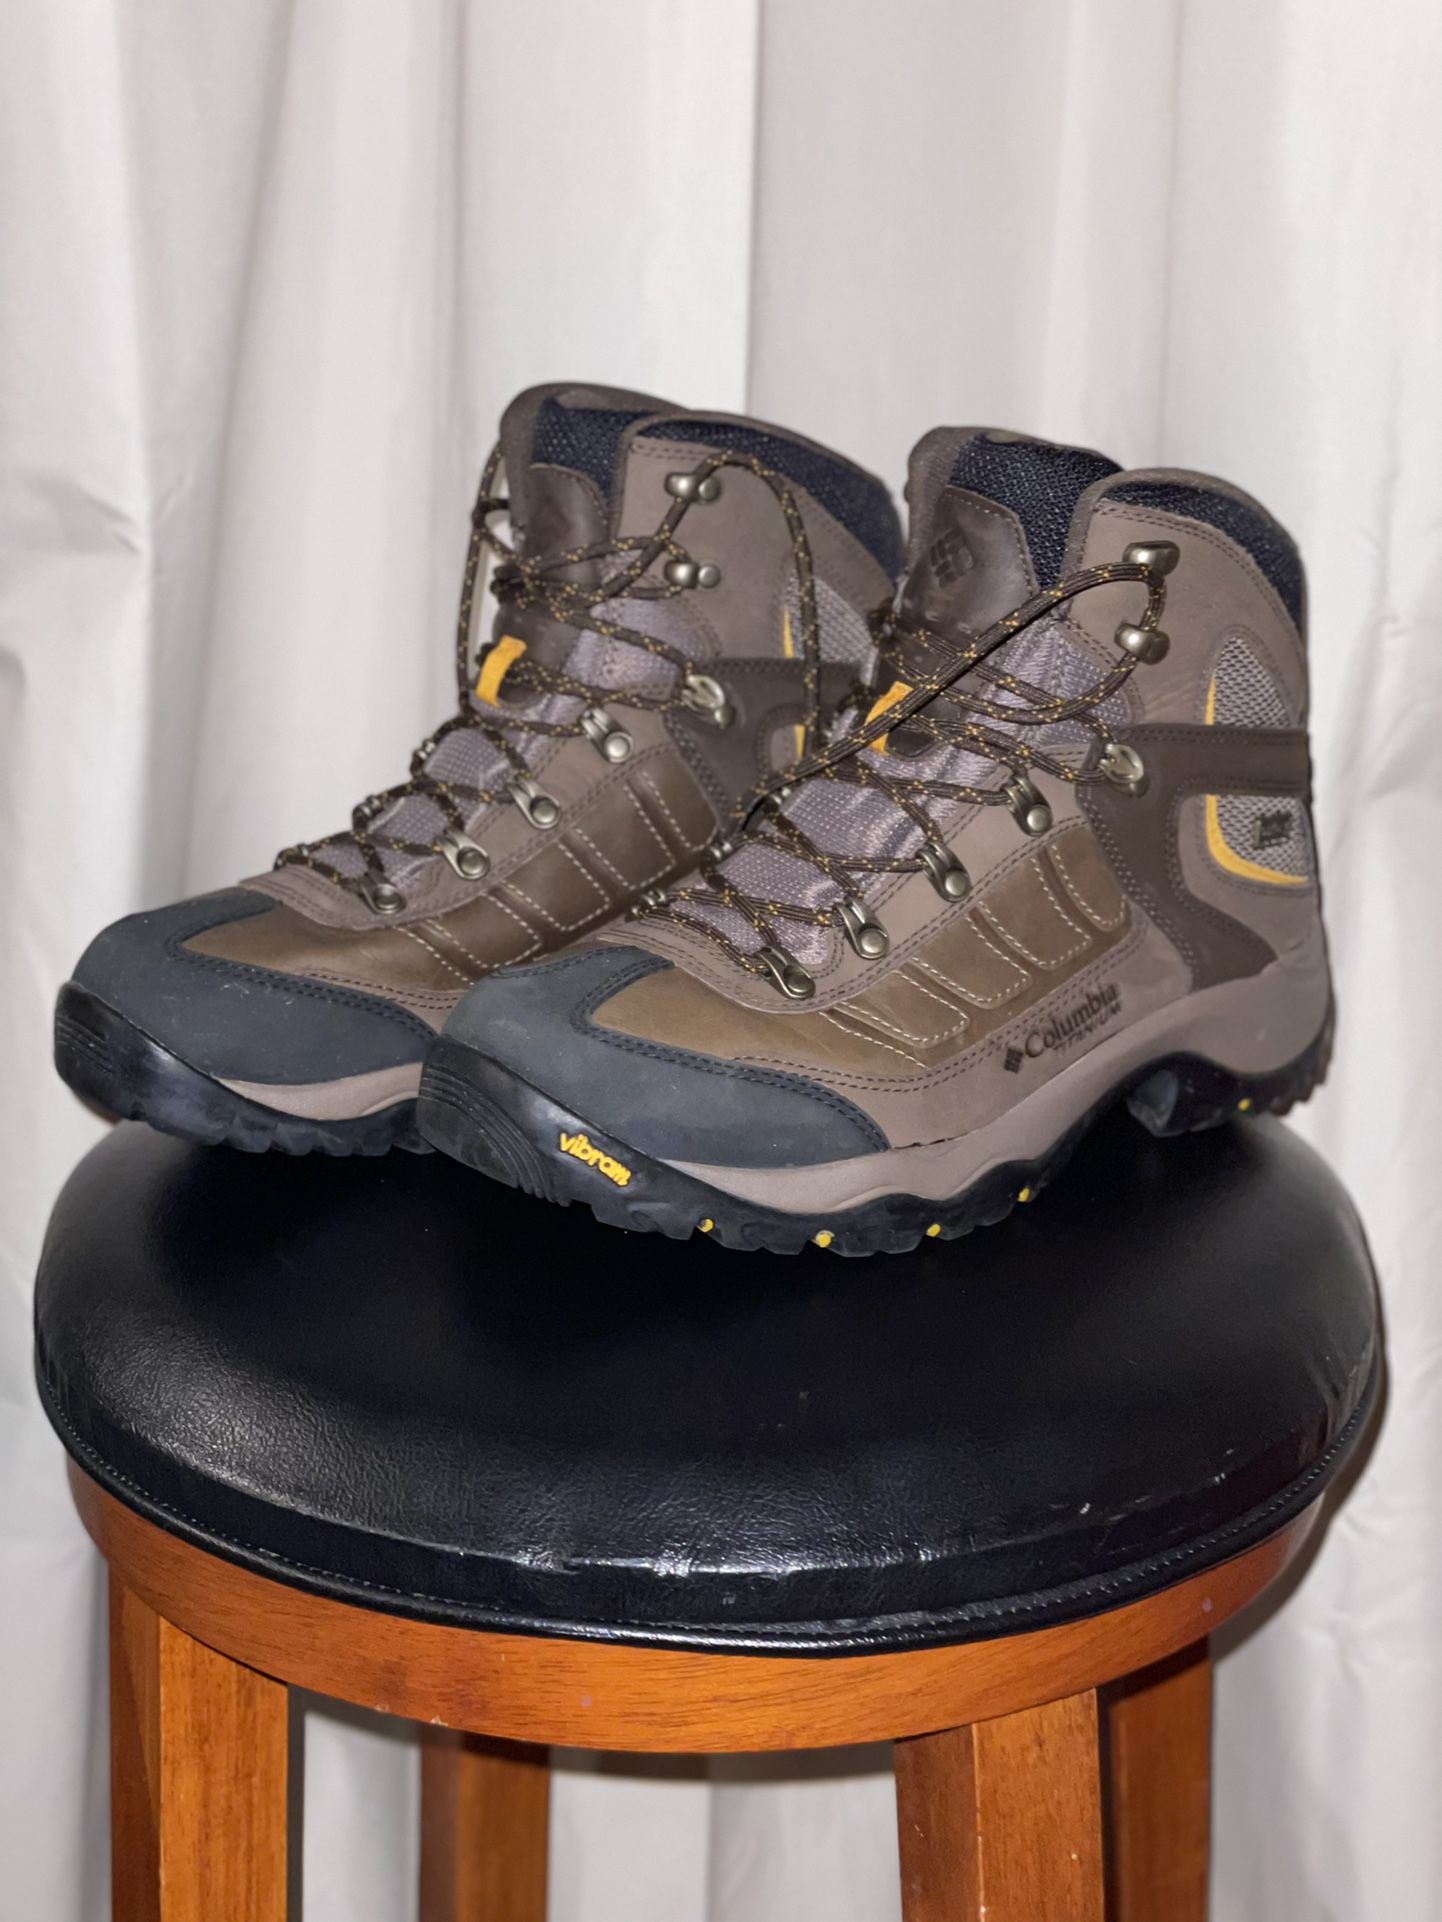 New Waterproof Columbia Shoes / Boots